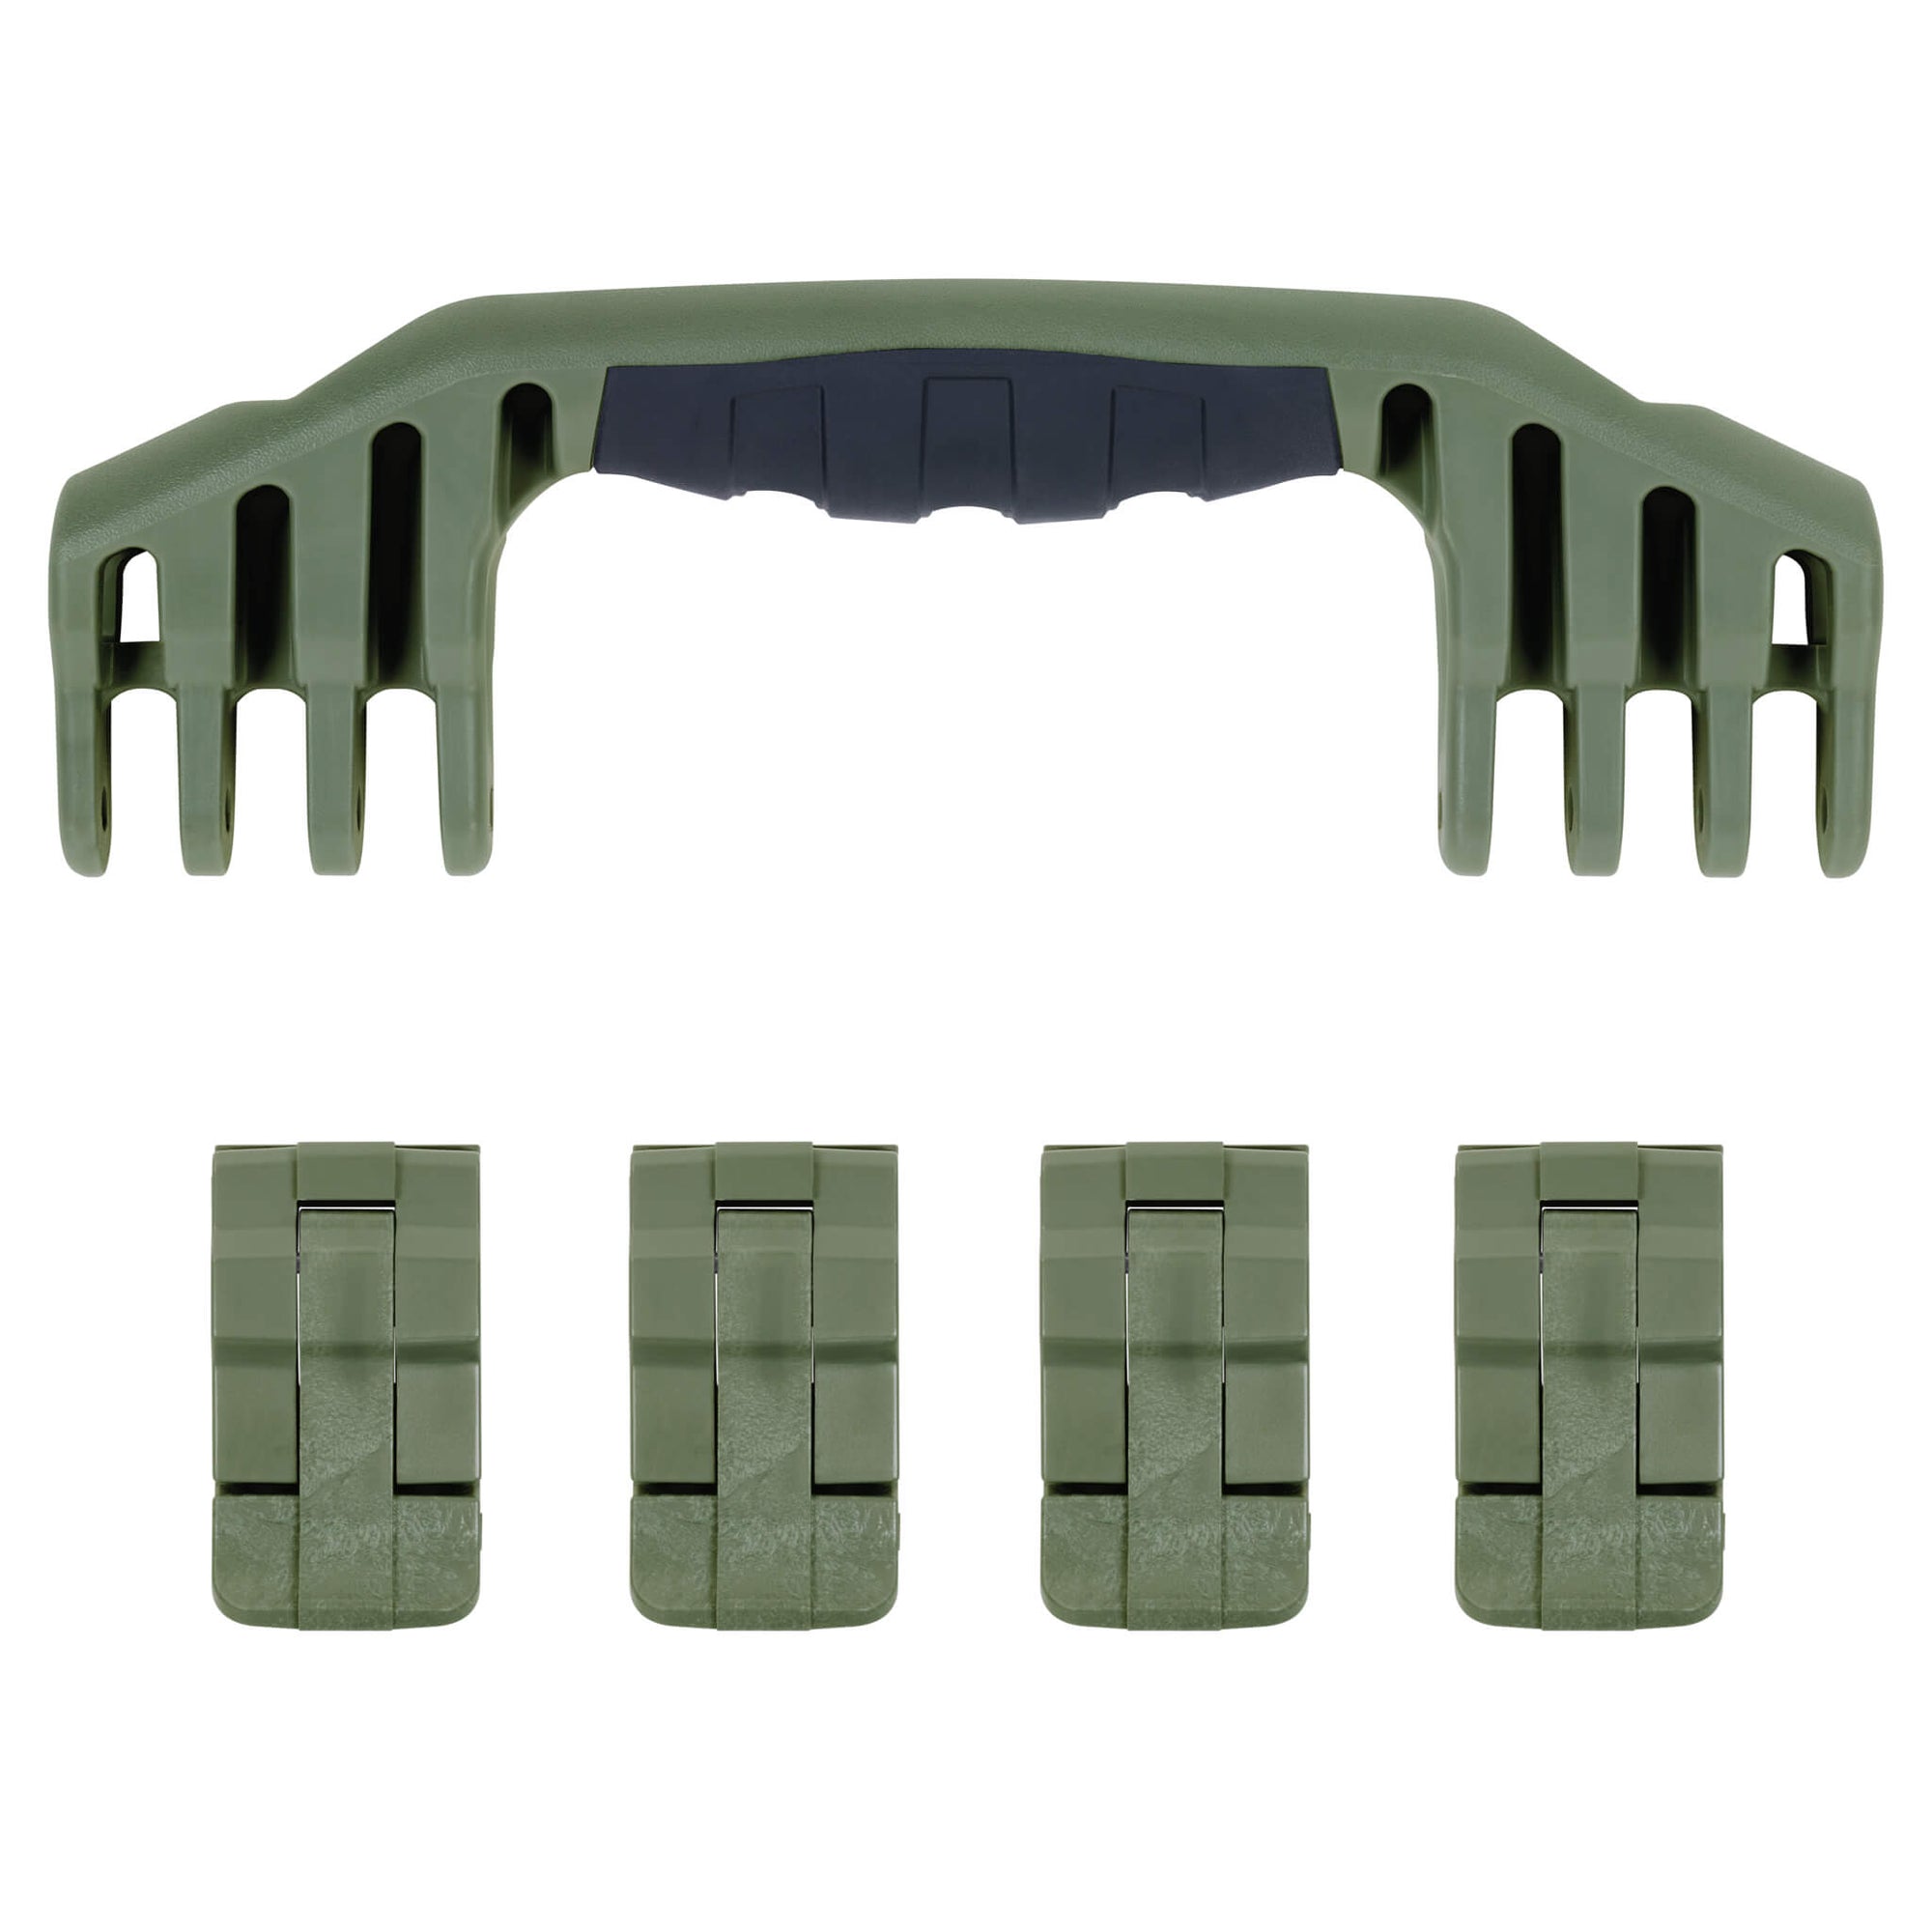 Pelican 1600 Replacement Handle & Latches, OD Green (Set of 1 Handle, 4 Latches) ColorCase 